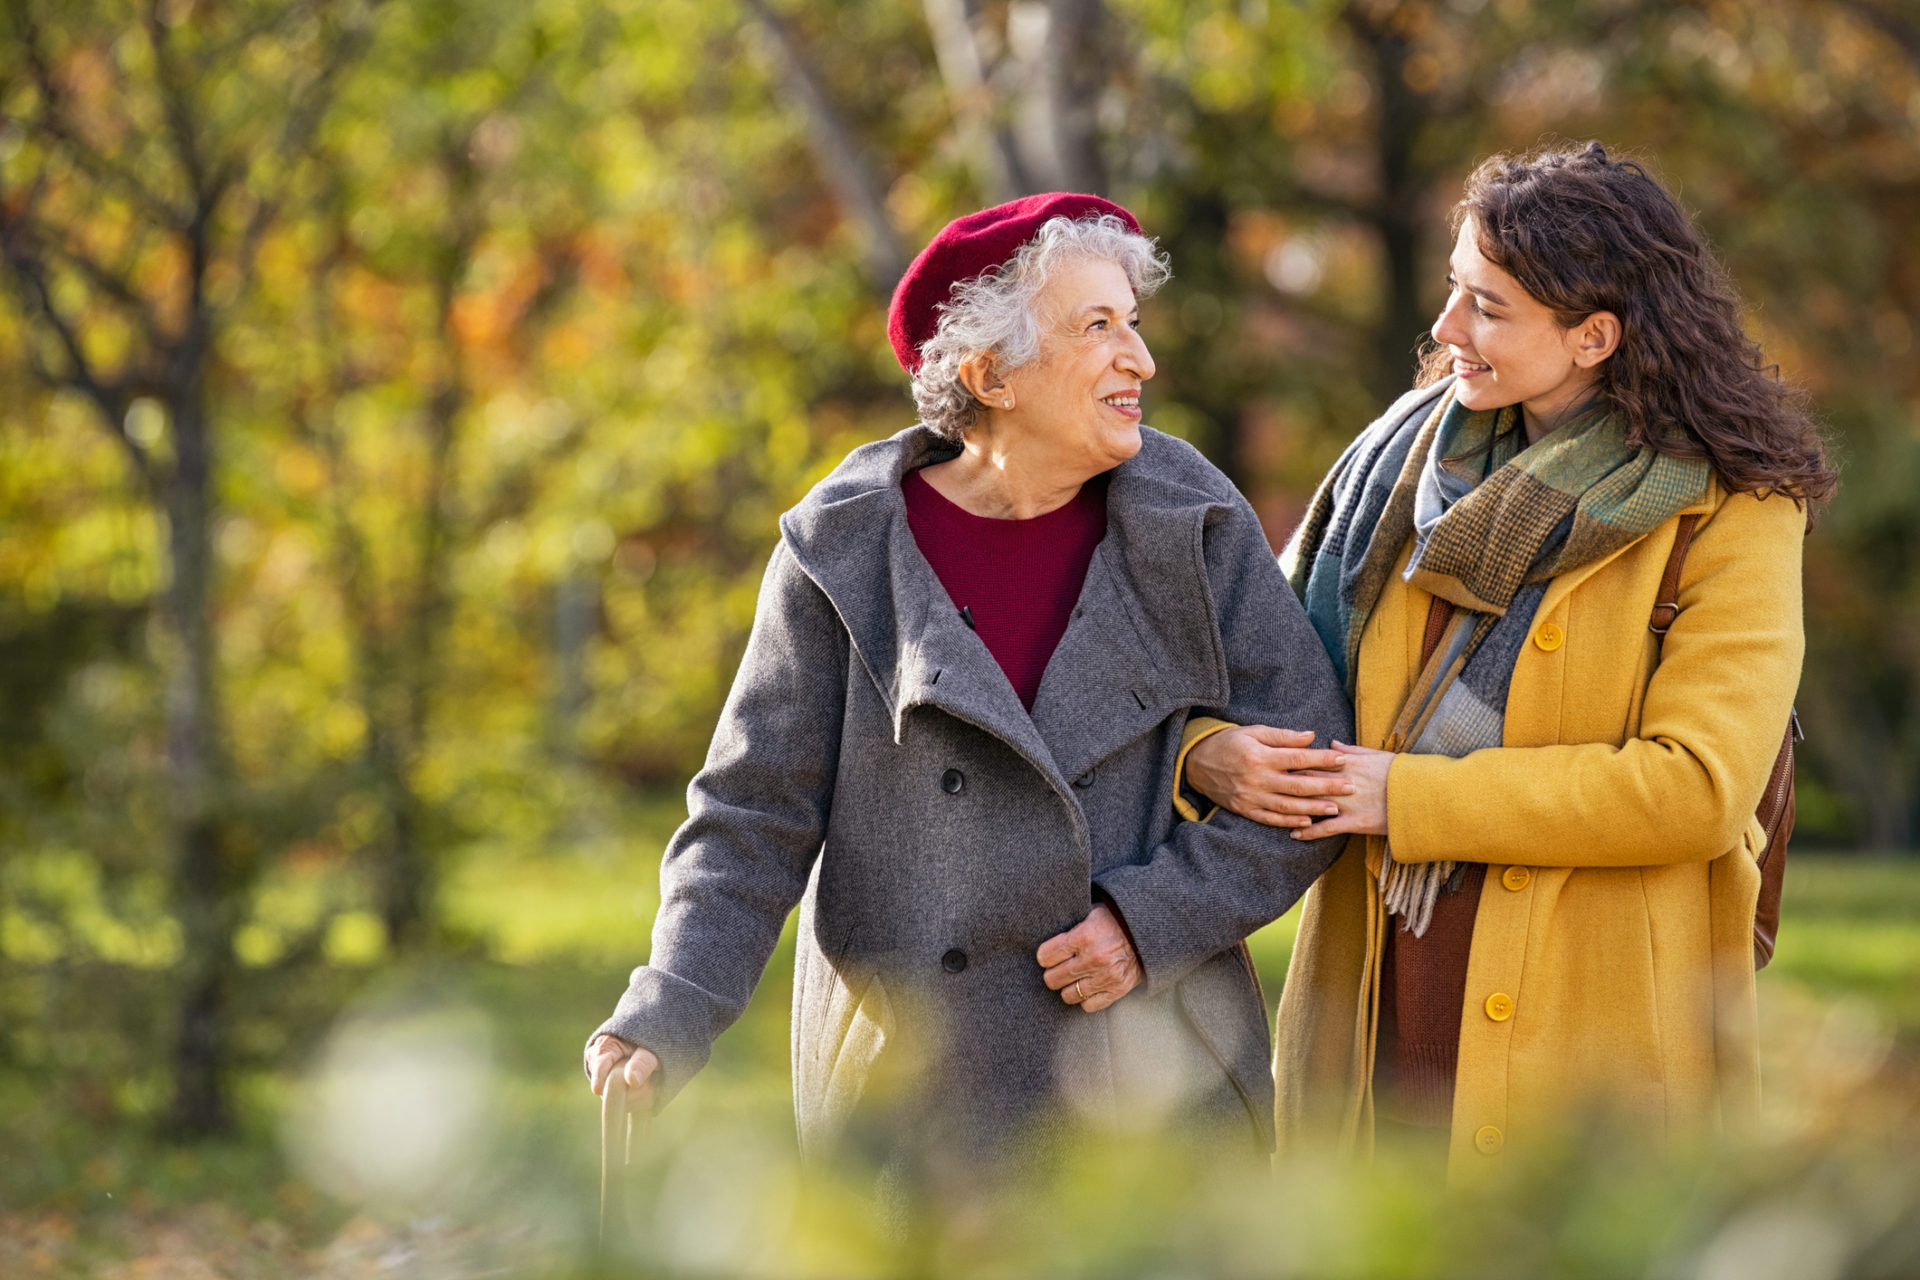 Two women, one older and the other younger, on a walk in nature. They are both looking at each other and smiling.